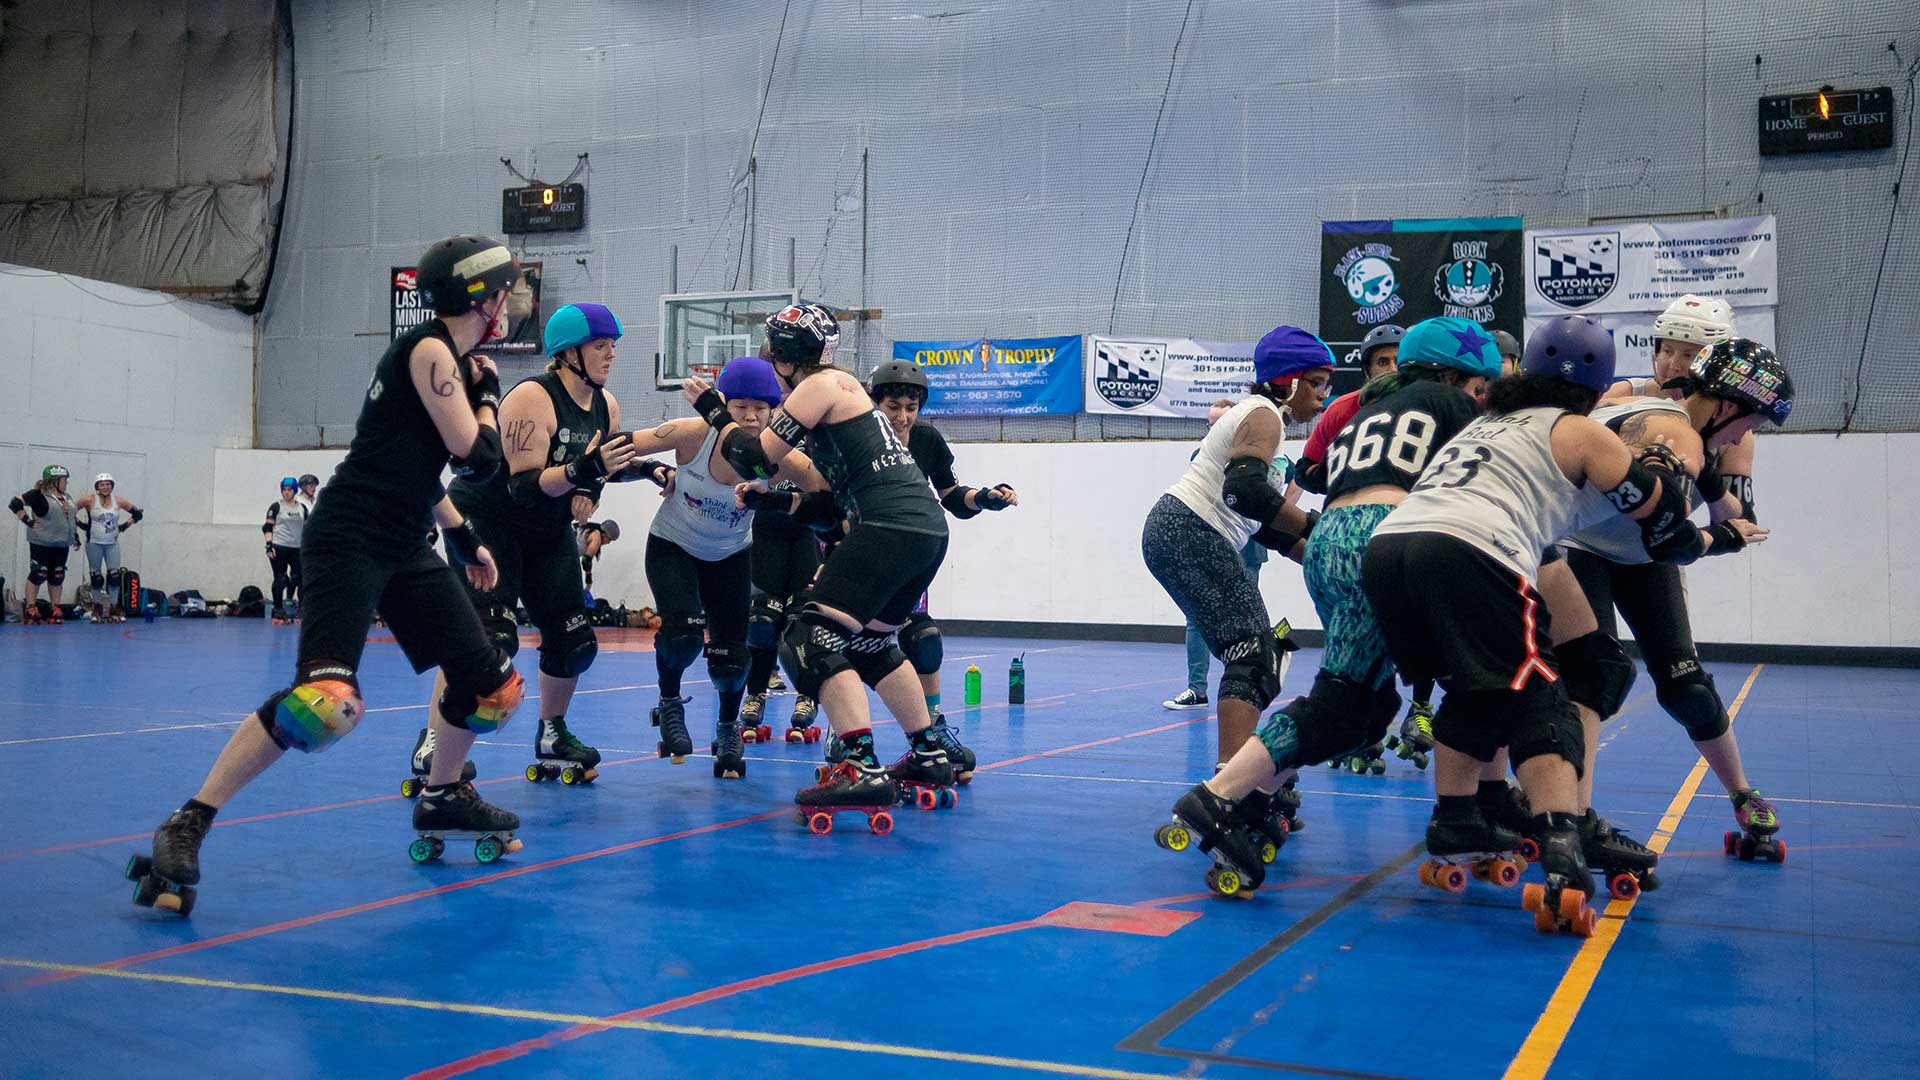 AnnaHell Lee #412 (second to the left, striped helmet) serving as the pivot of the jam attempts to block a jammer during a scrimmage at practice at Michael & Son Sportsplex at Rockville on Friday, September 20, 2019.